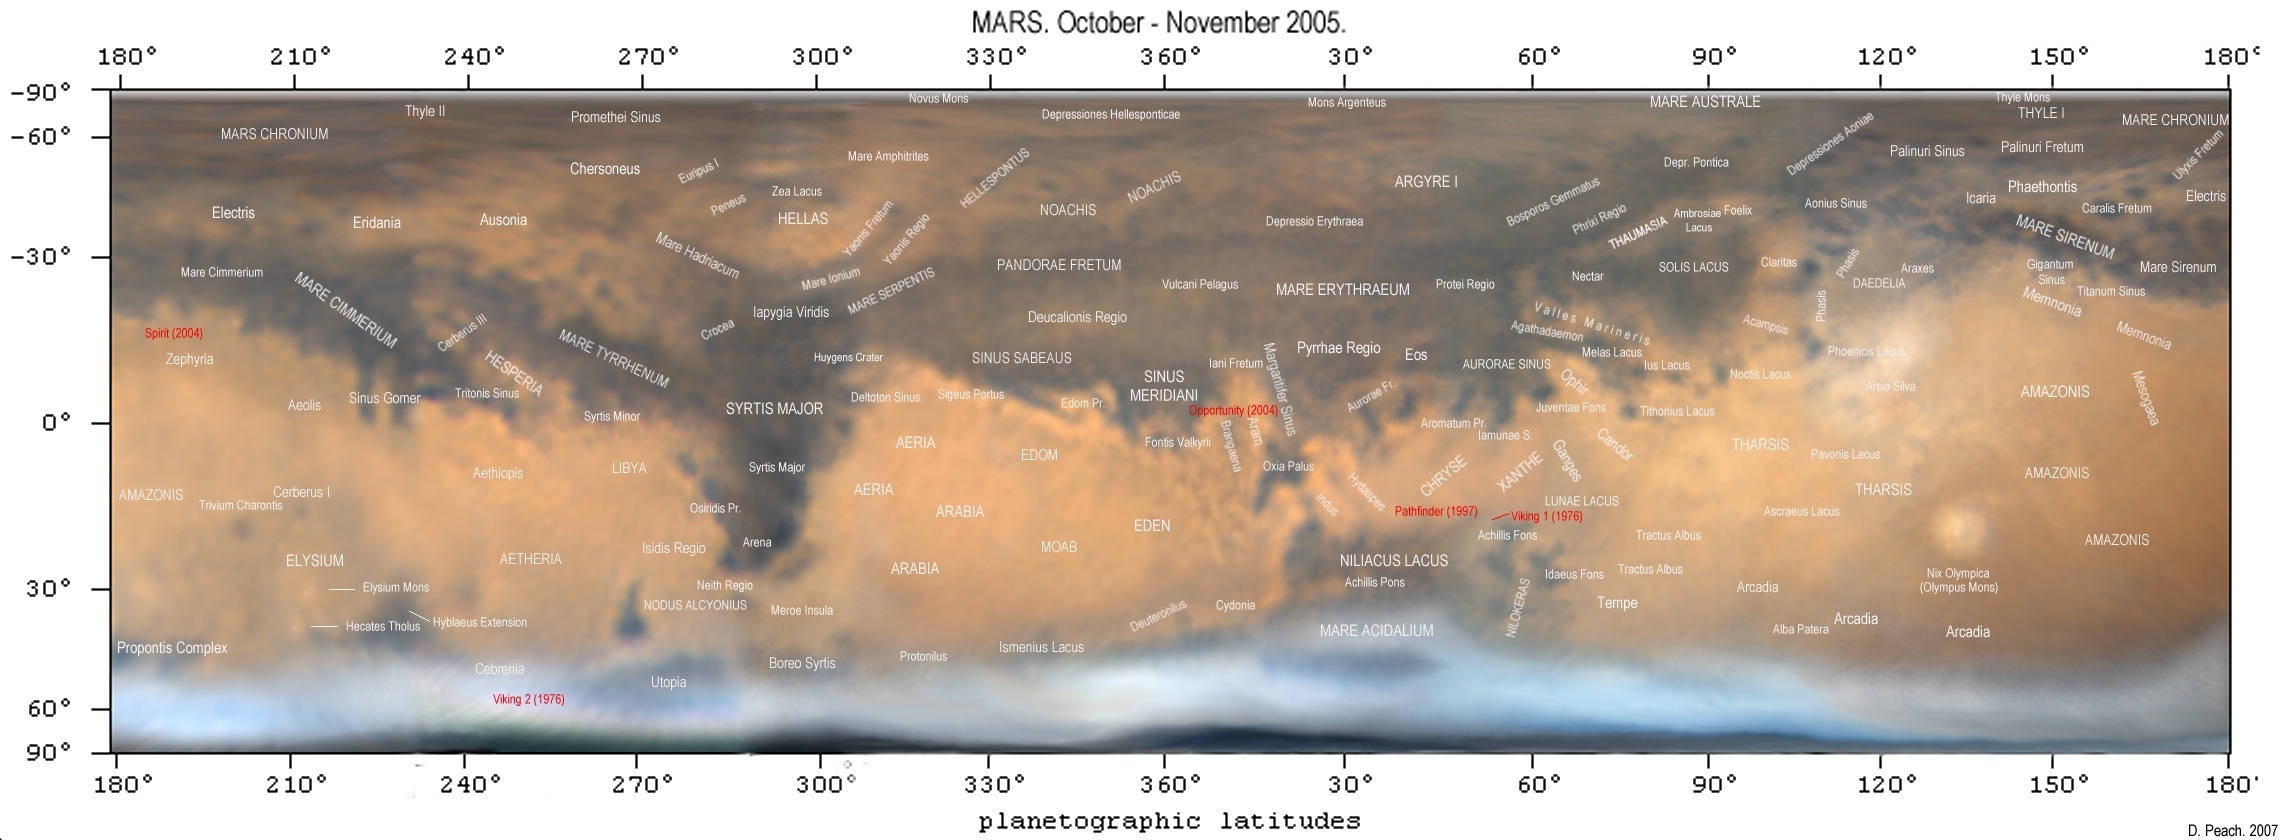 The marks of Mars